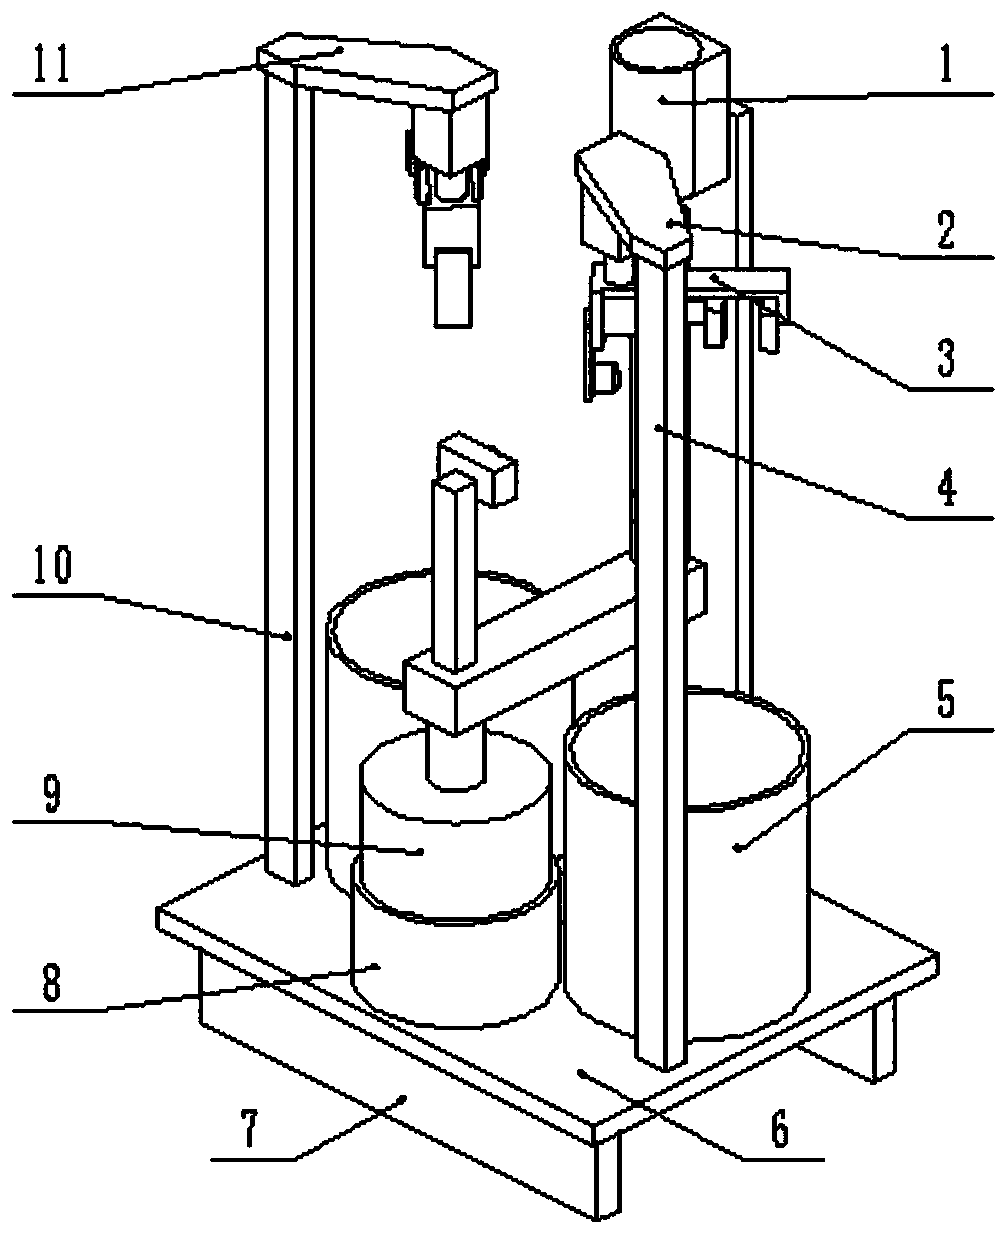 Abandoned steel pipe sorting device for constructional engineering